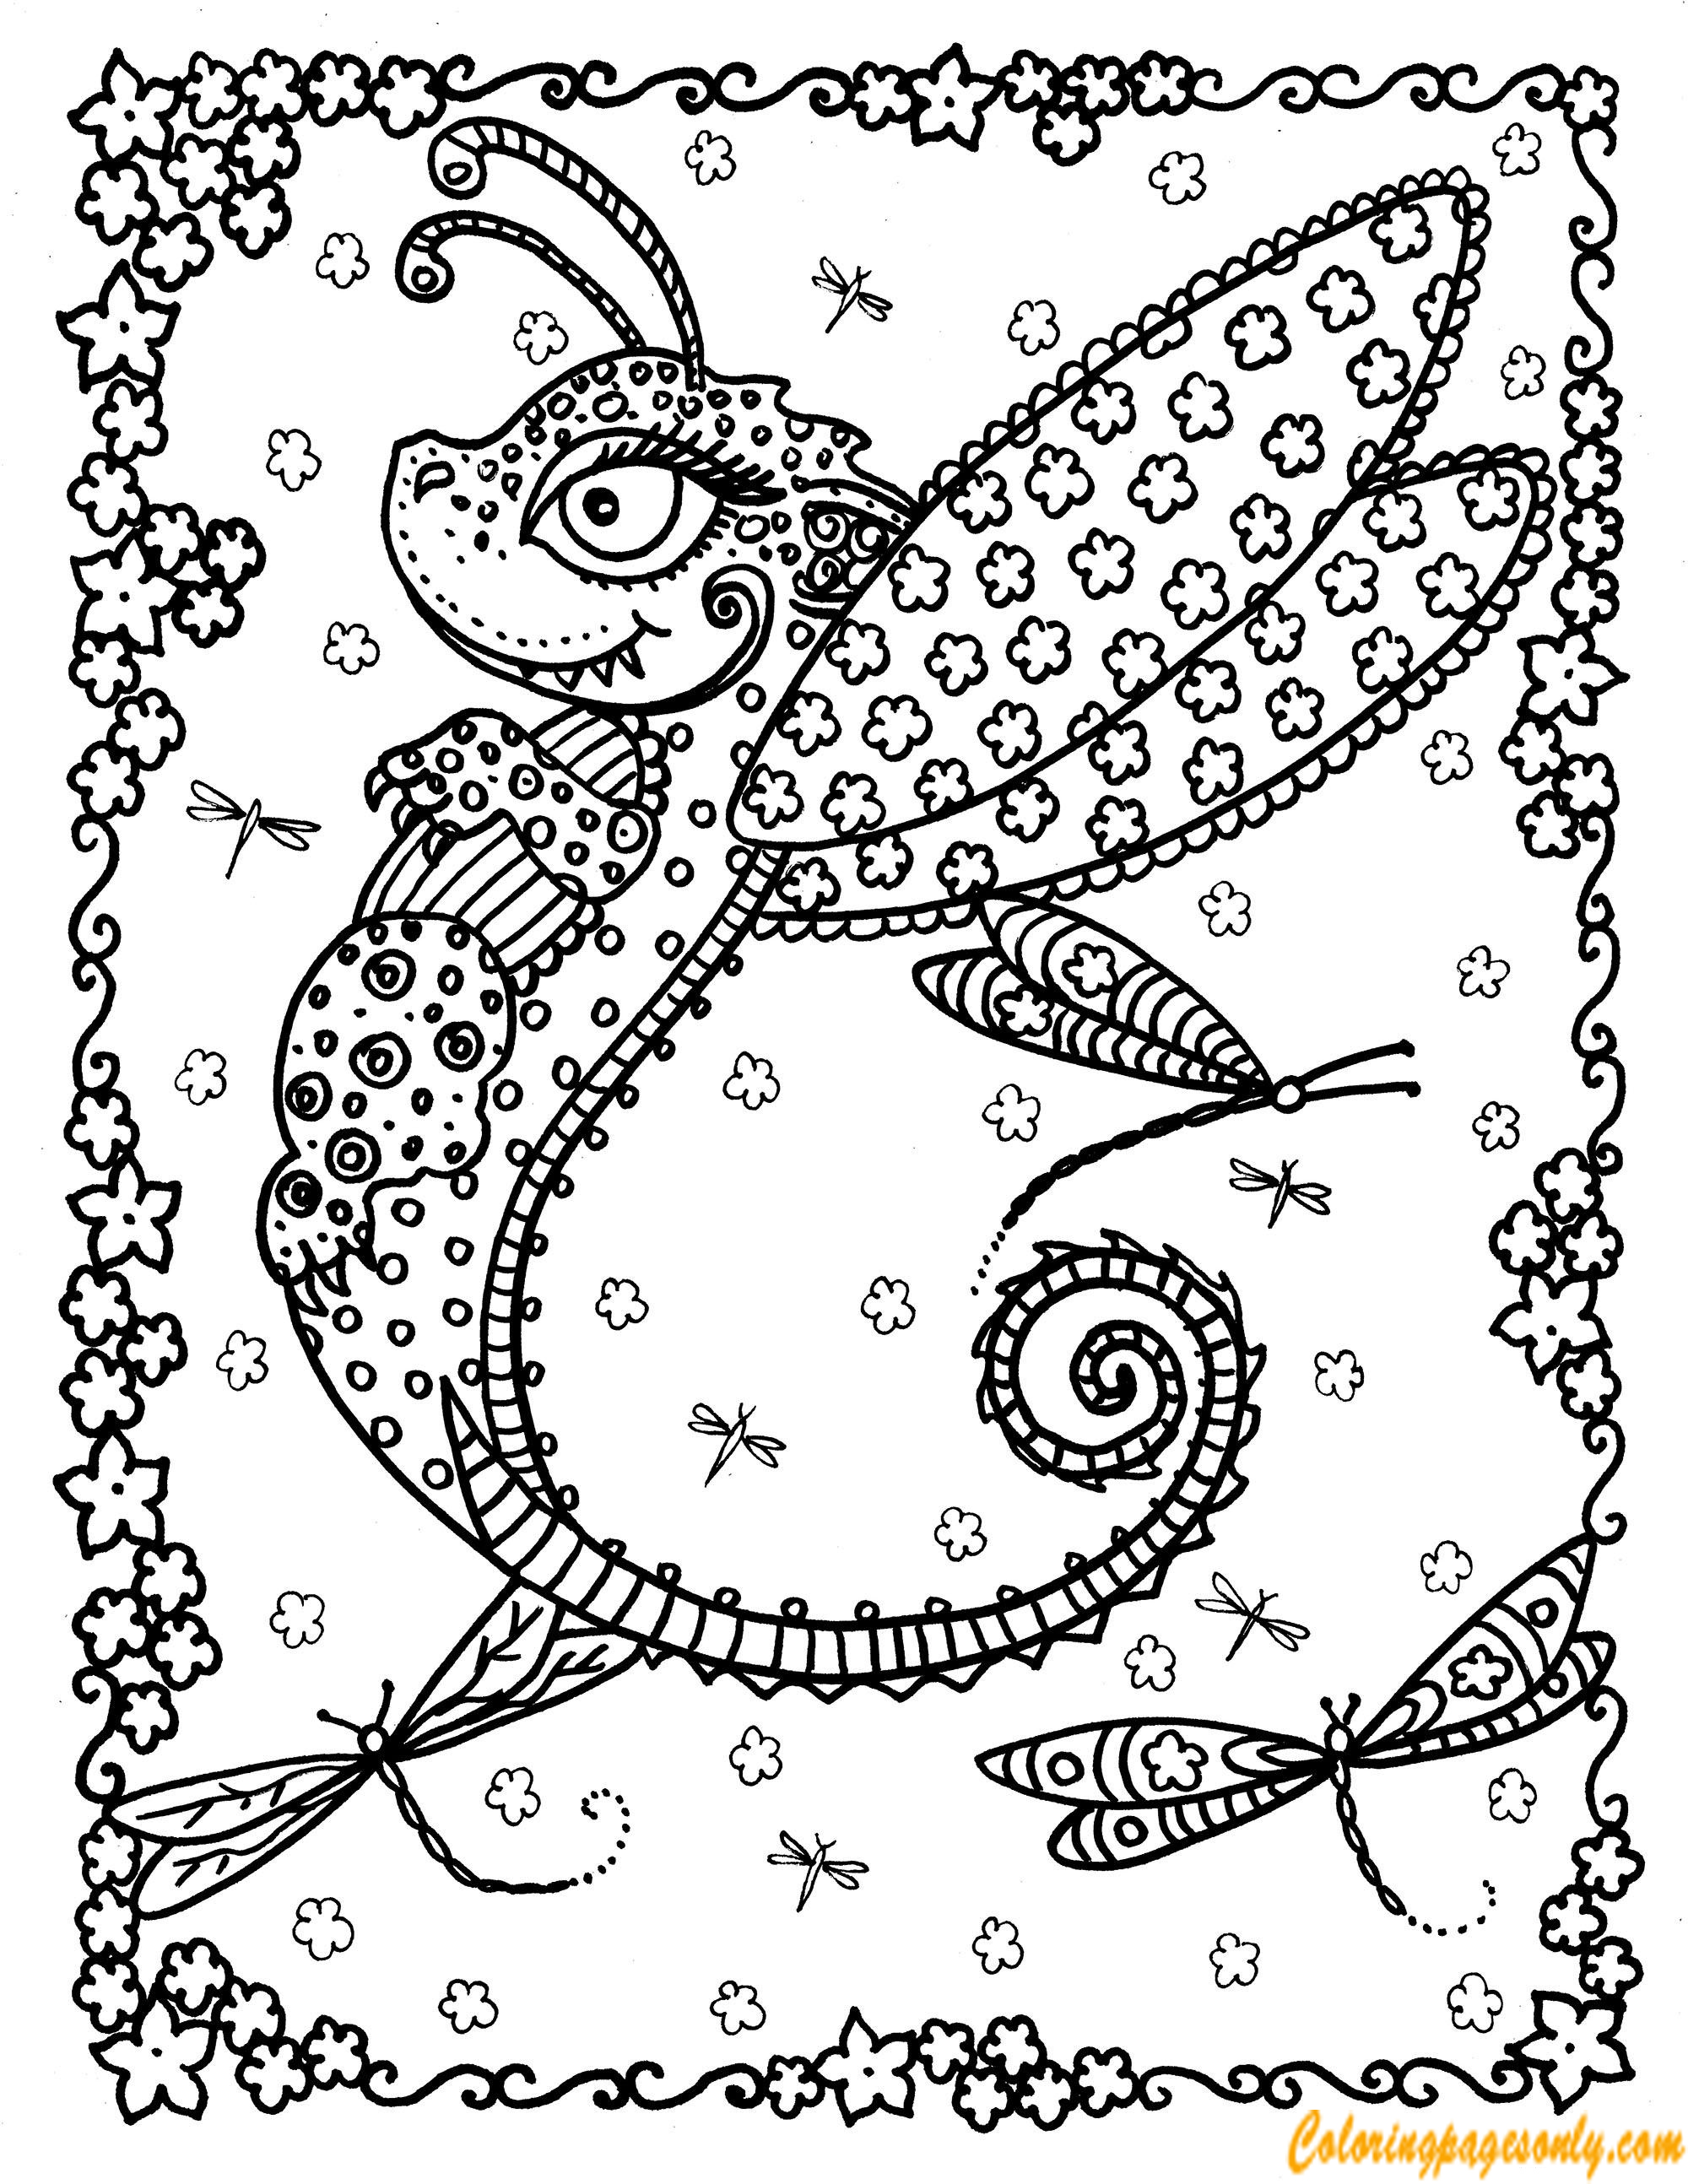 Butterfly Dragon Coloring Page - Free Coloring Pages Online